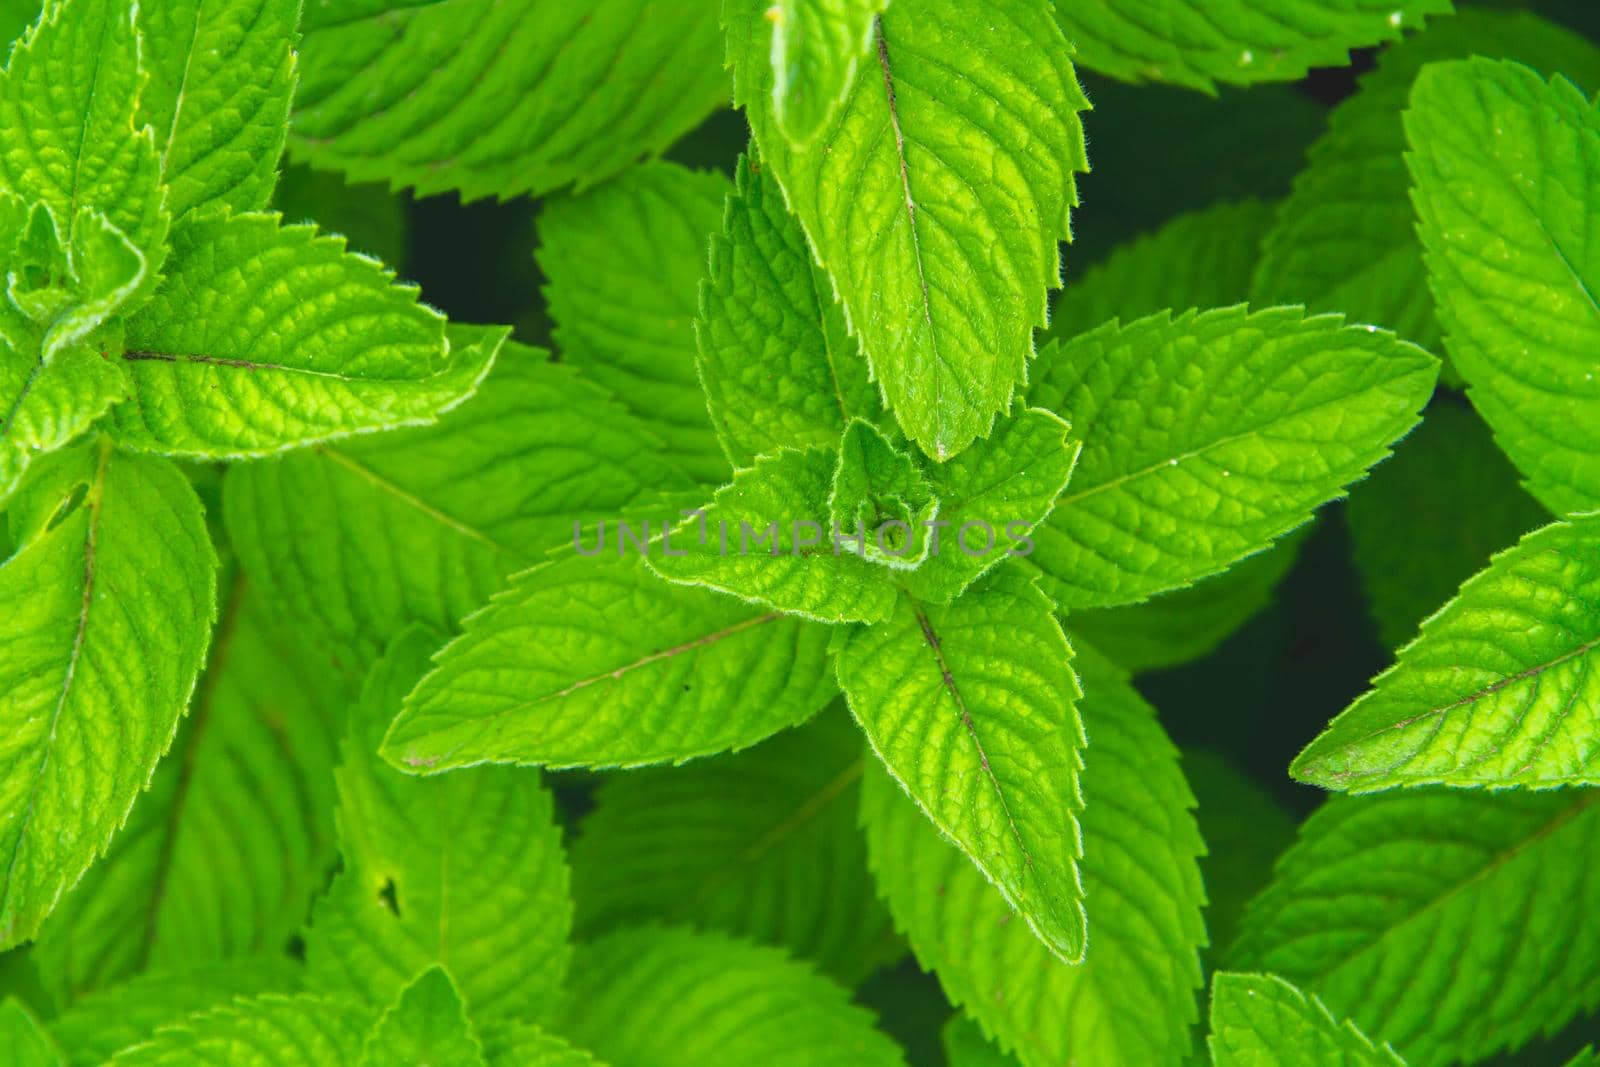 Background from green grass. Green leaves with water drops close up. Green fresh vegetation.